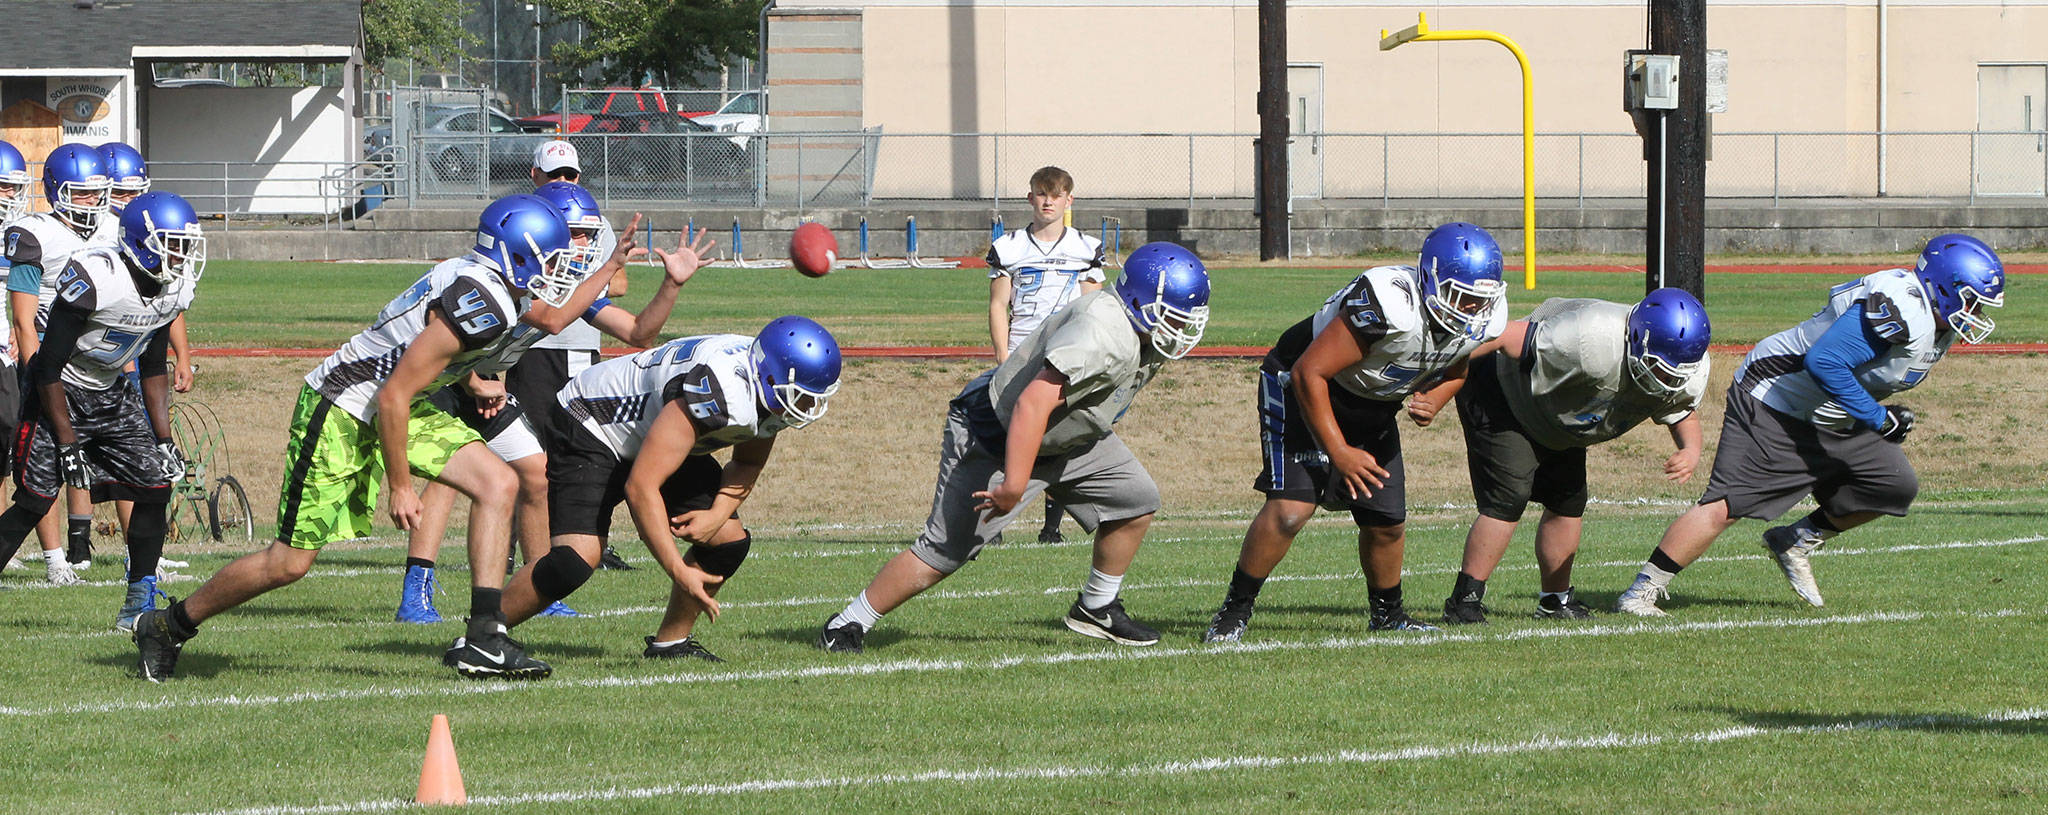 The South Whidbey High School offense runs a play at practice Thursday. (Photo by Jim Waller/South Whidbey Record)